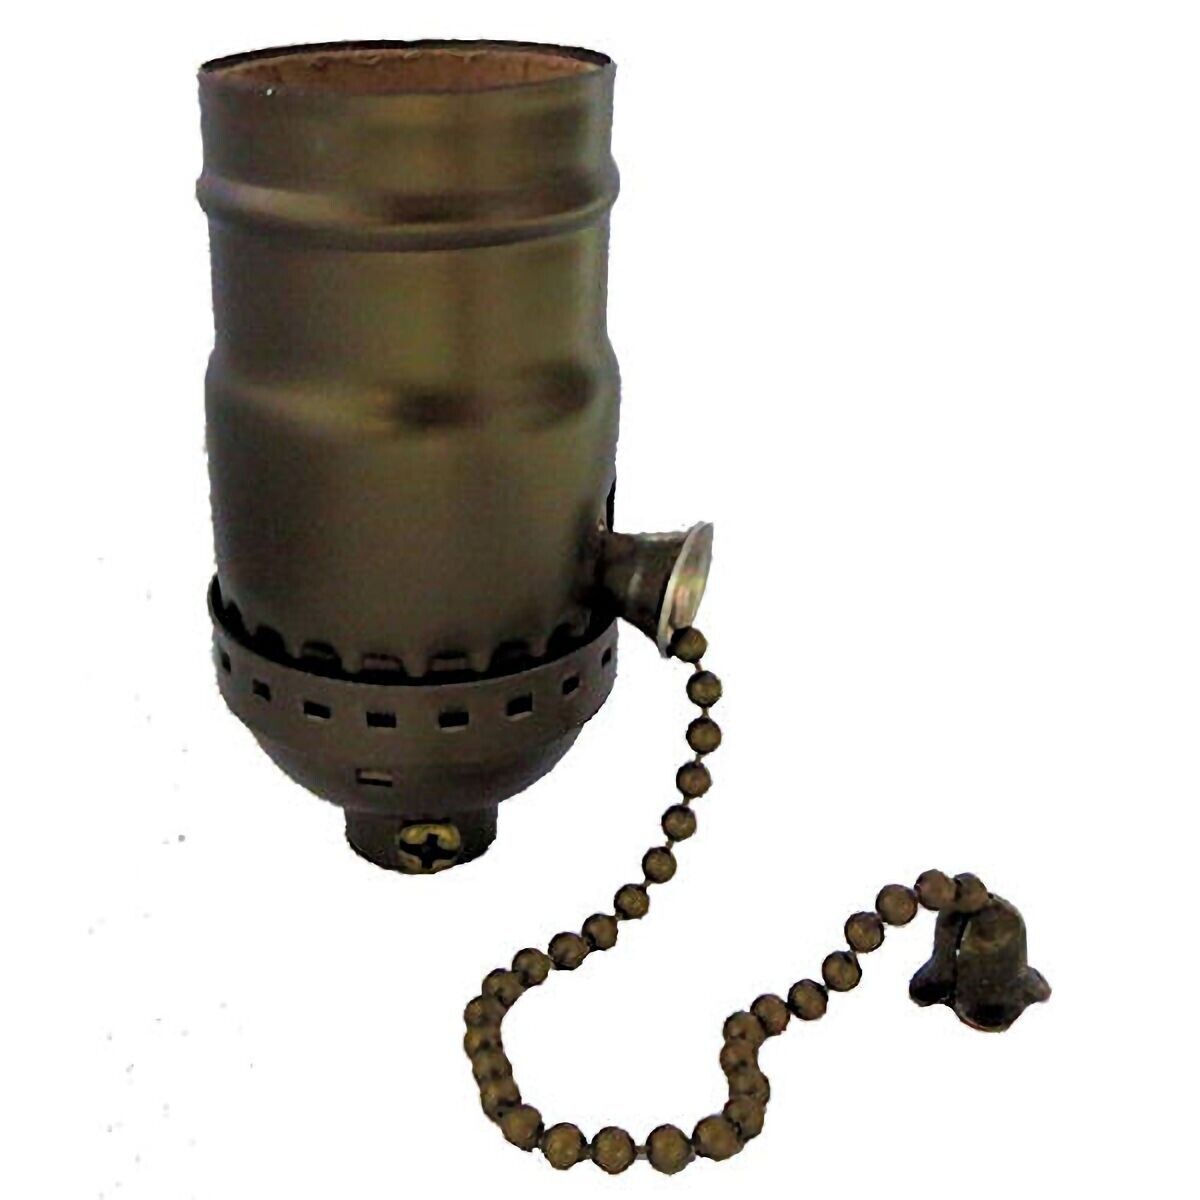 LAMP PARTS: OFF/ON ANTIQUE BRASS (E-26) PULL-CHAIN SOCKET  TR-11AB